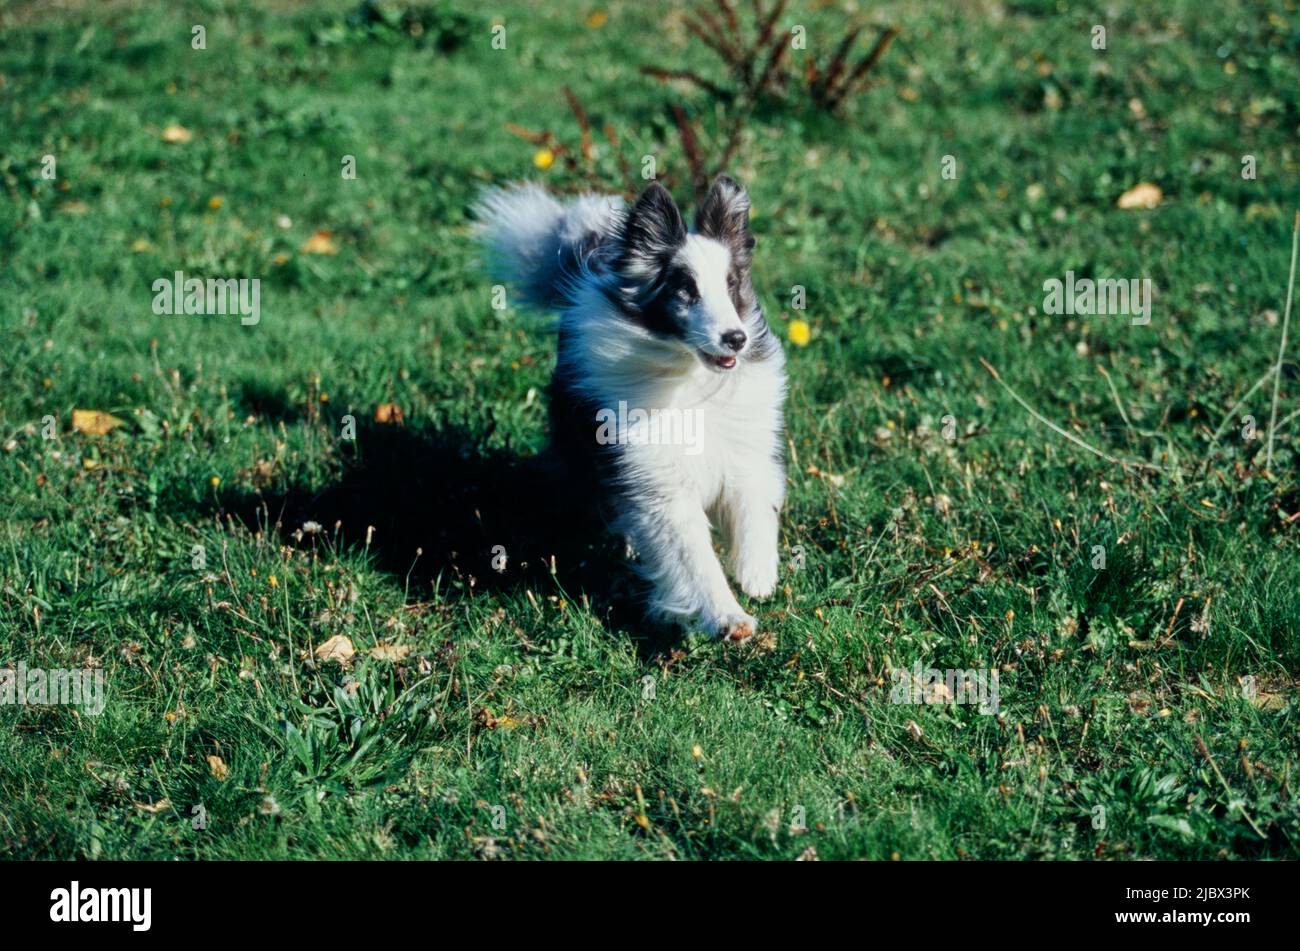 A sheltie in grass Stock Photo